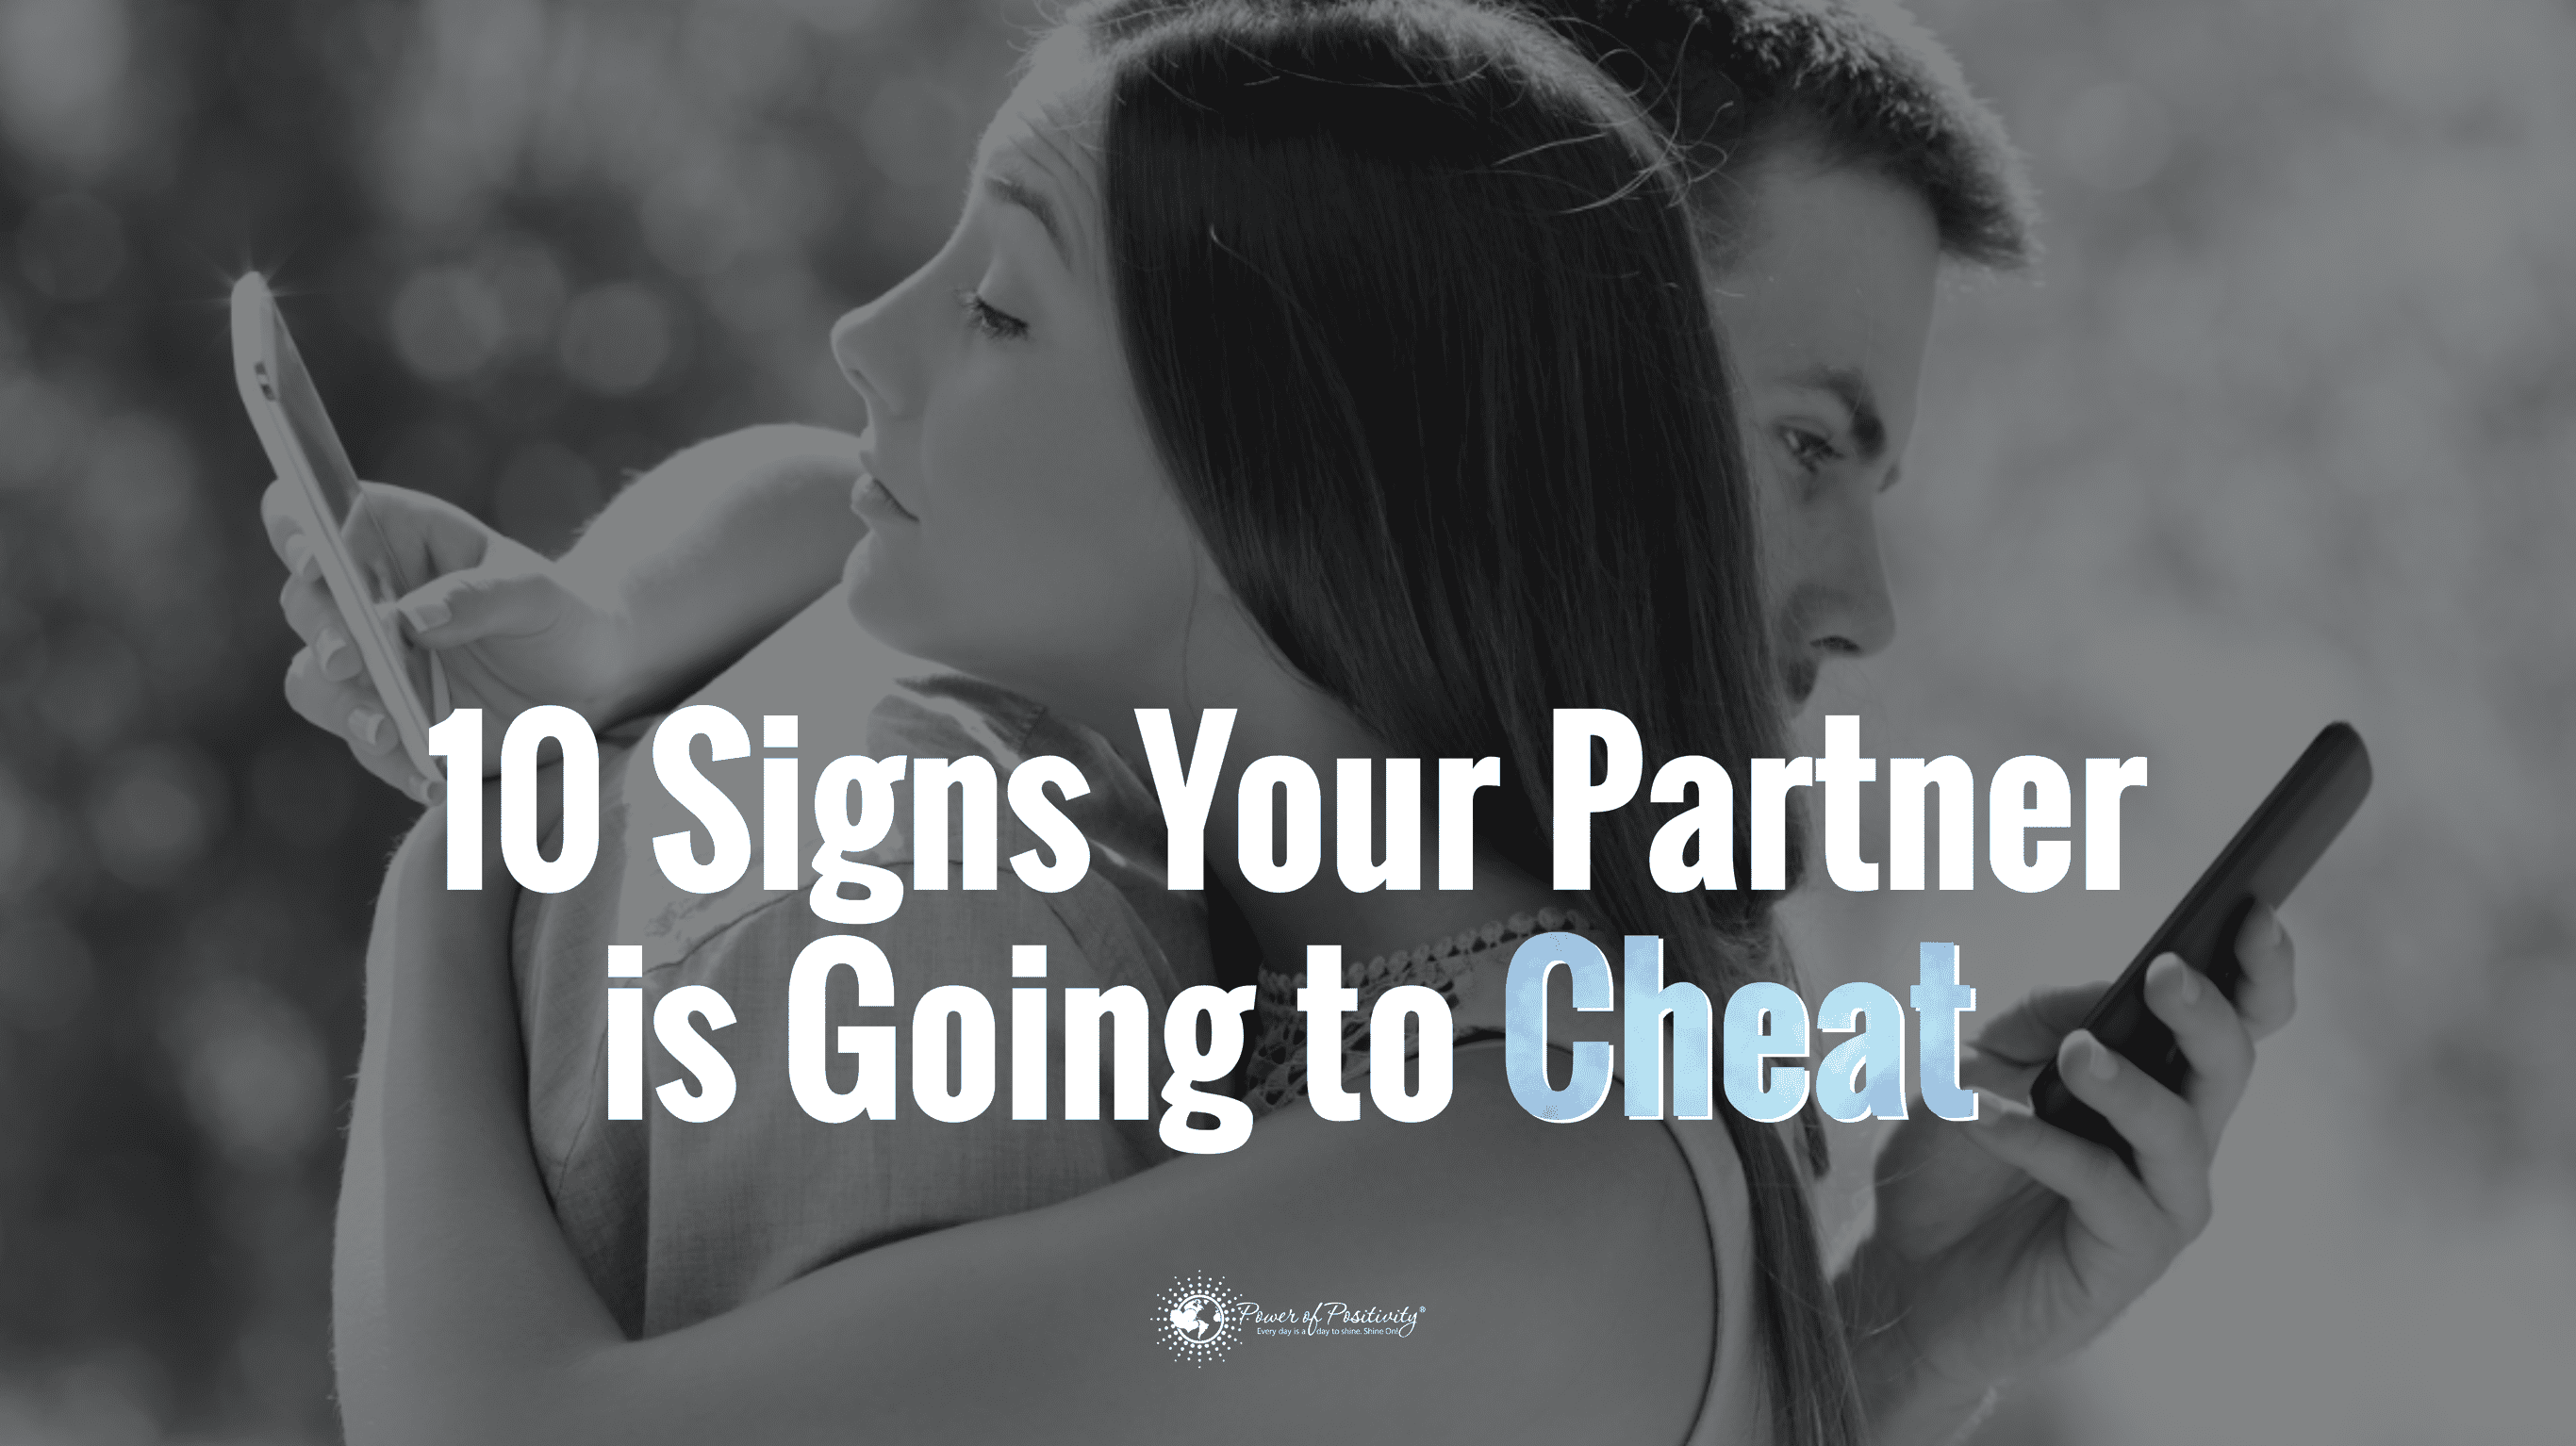 10 Signs Your Partner Is Going to Cheat